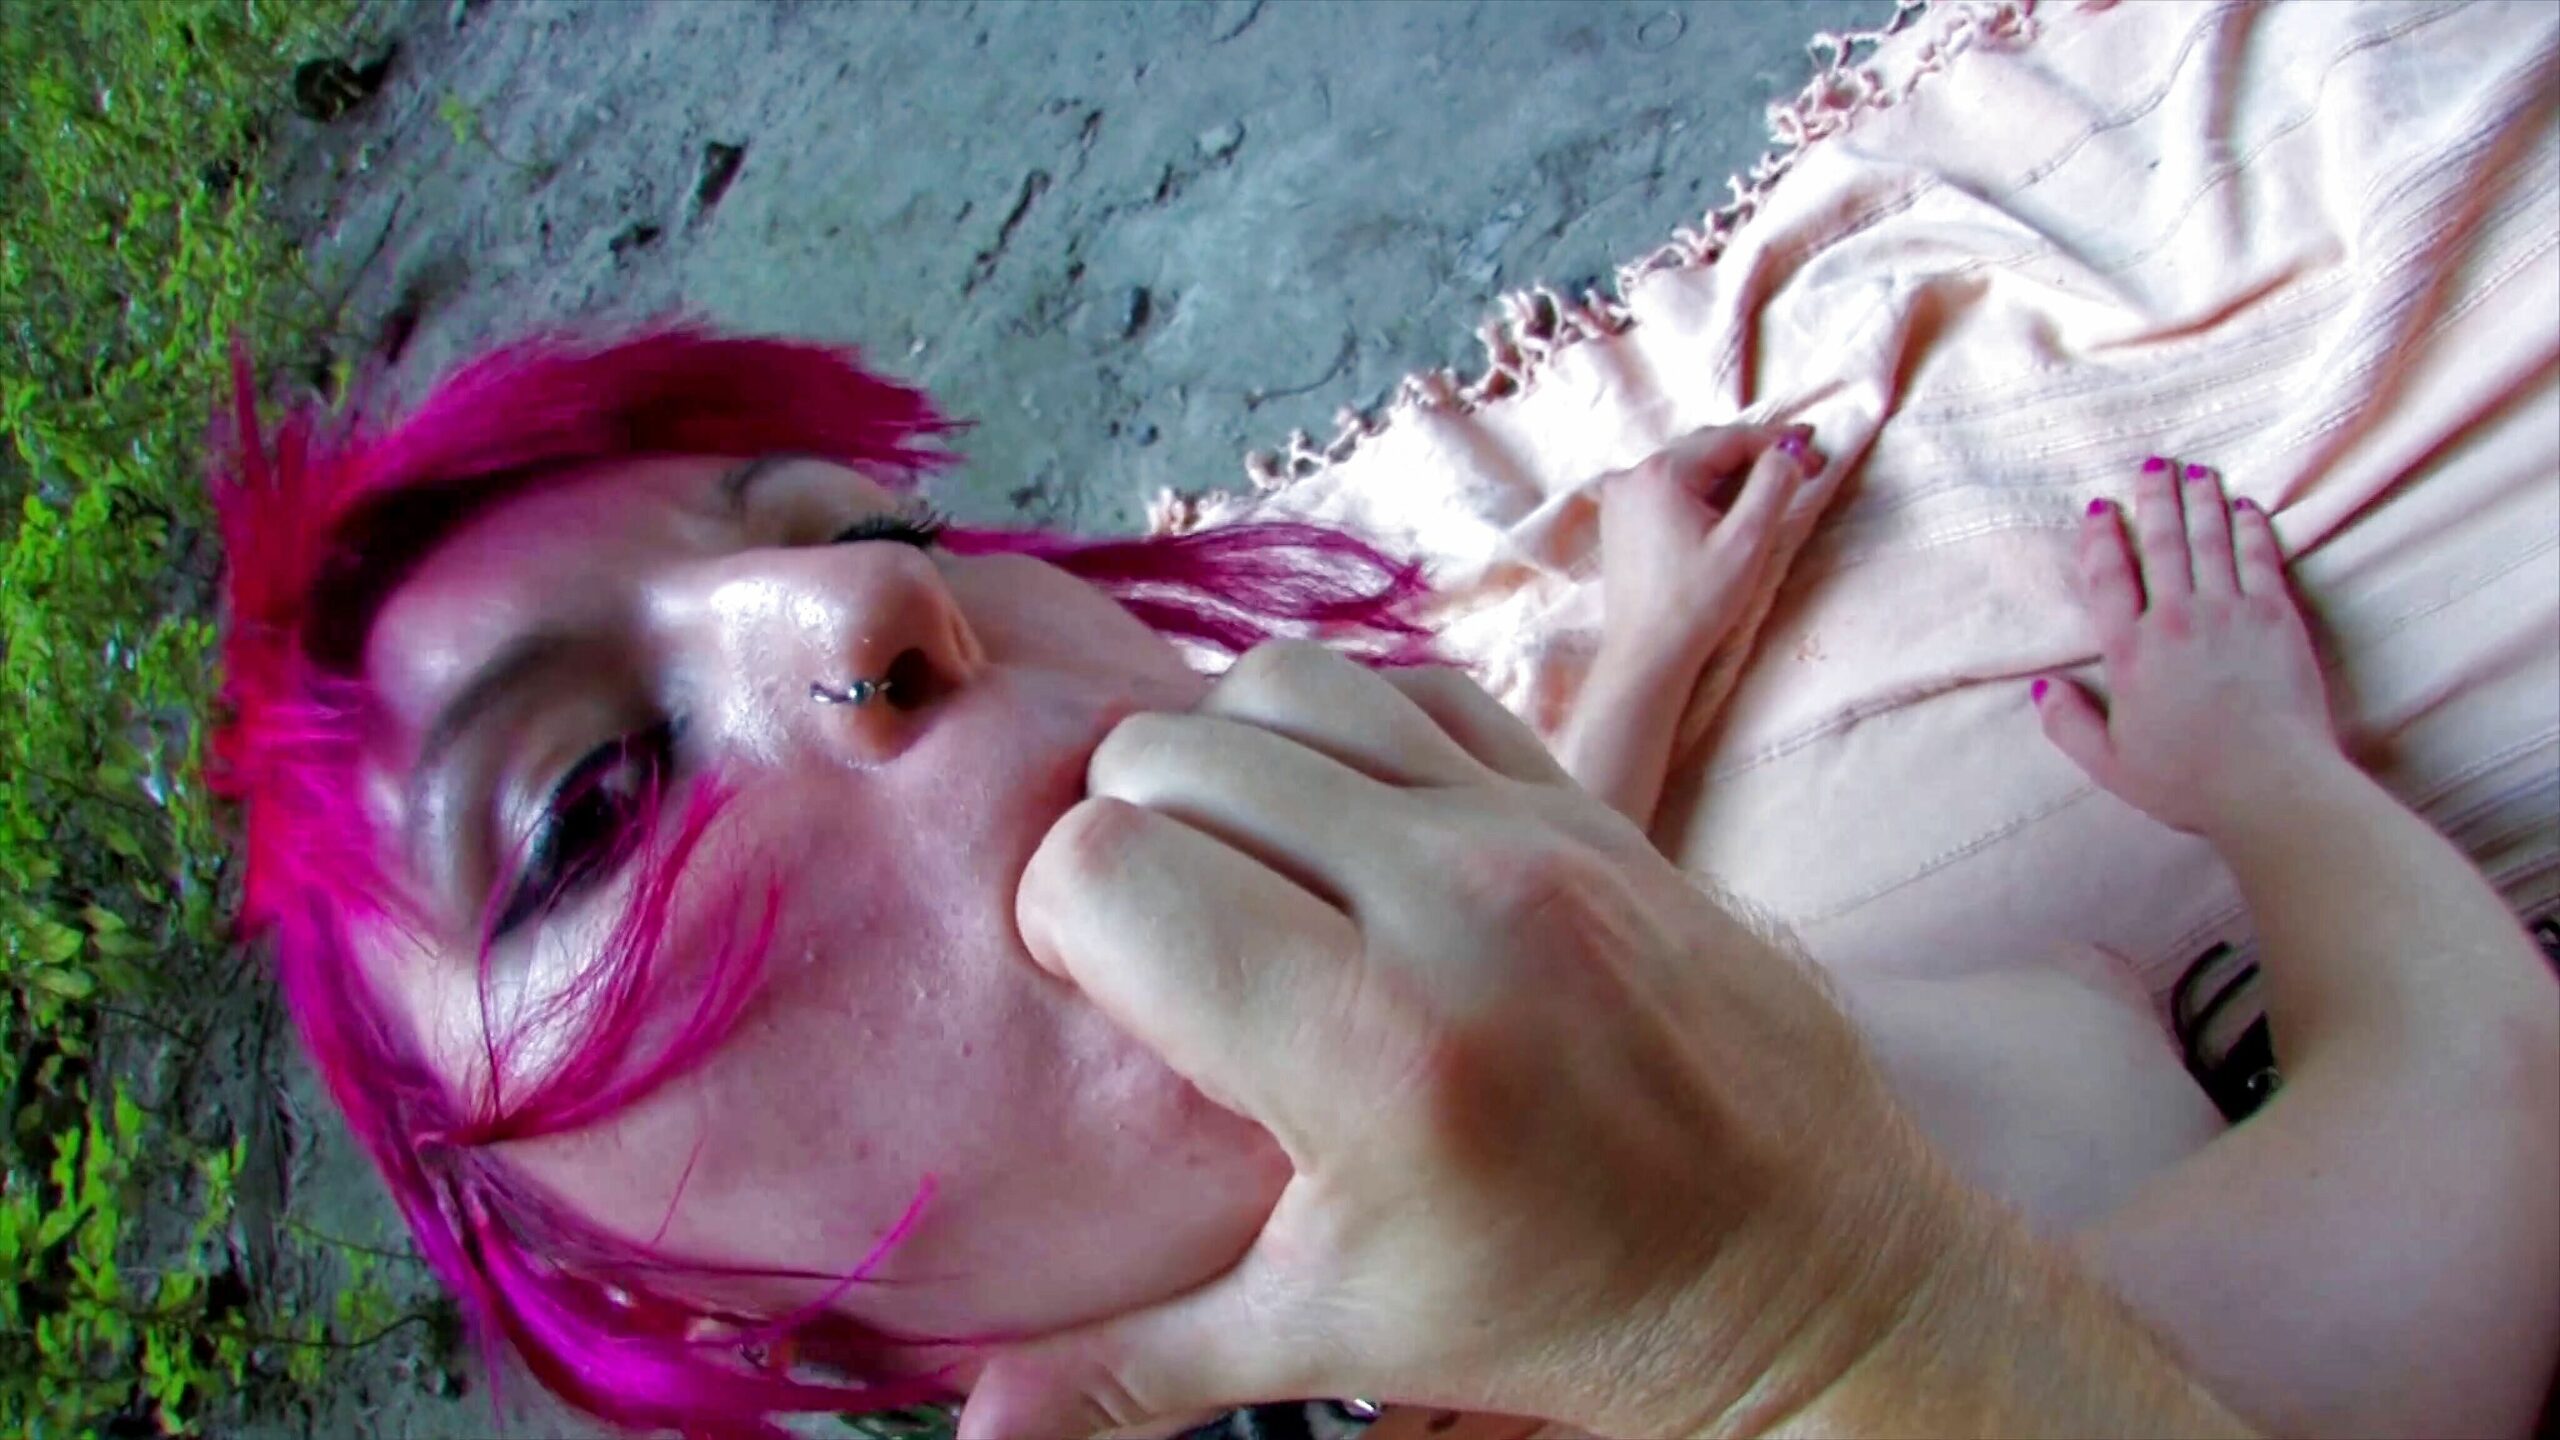 Wet pussy squirting orgasm: Dyed hair emo teen with big ass and tight asshole gets fucked hard –  – CBD Media